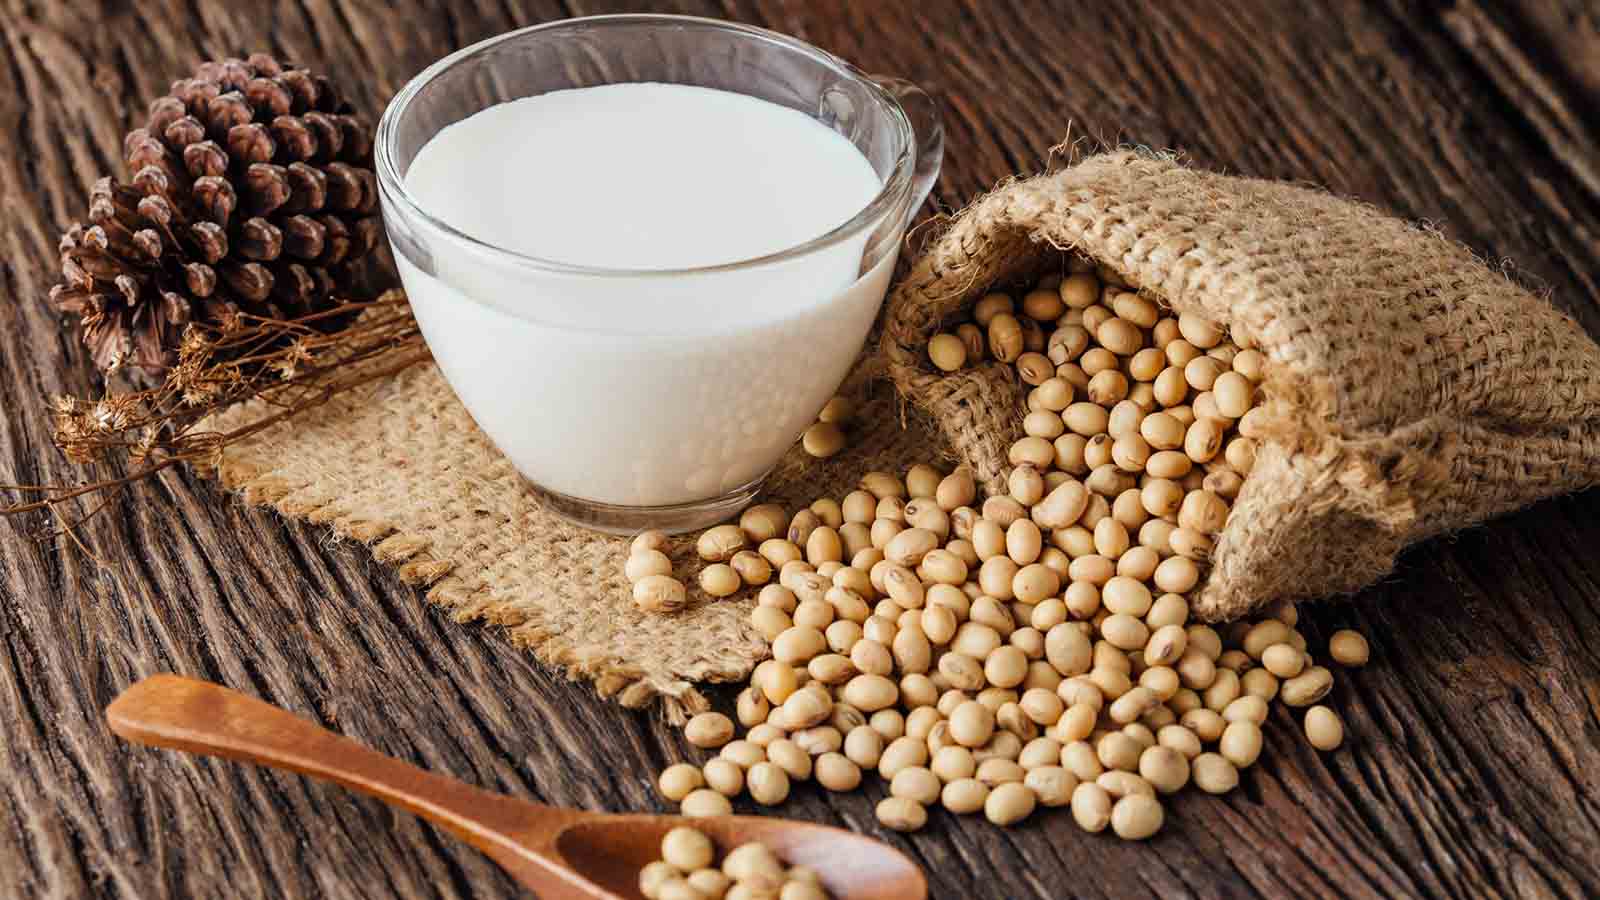 Soy processing does not negatively impact protein’s nutritional quality in soy: Unilever and Wageningen University